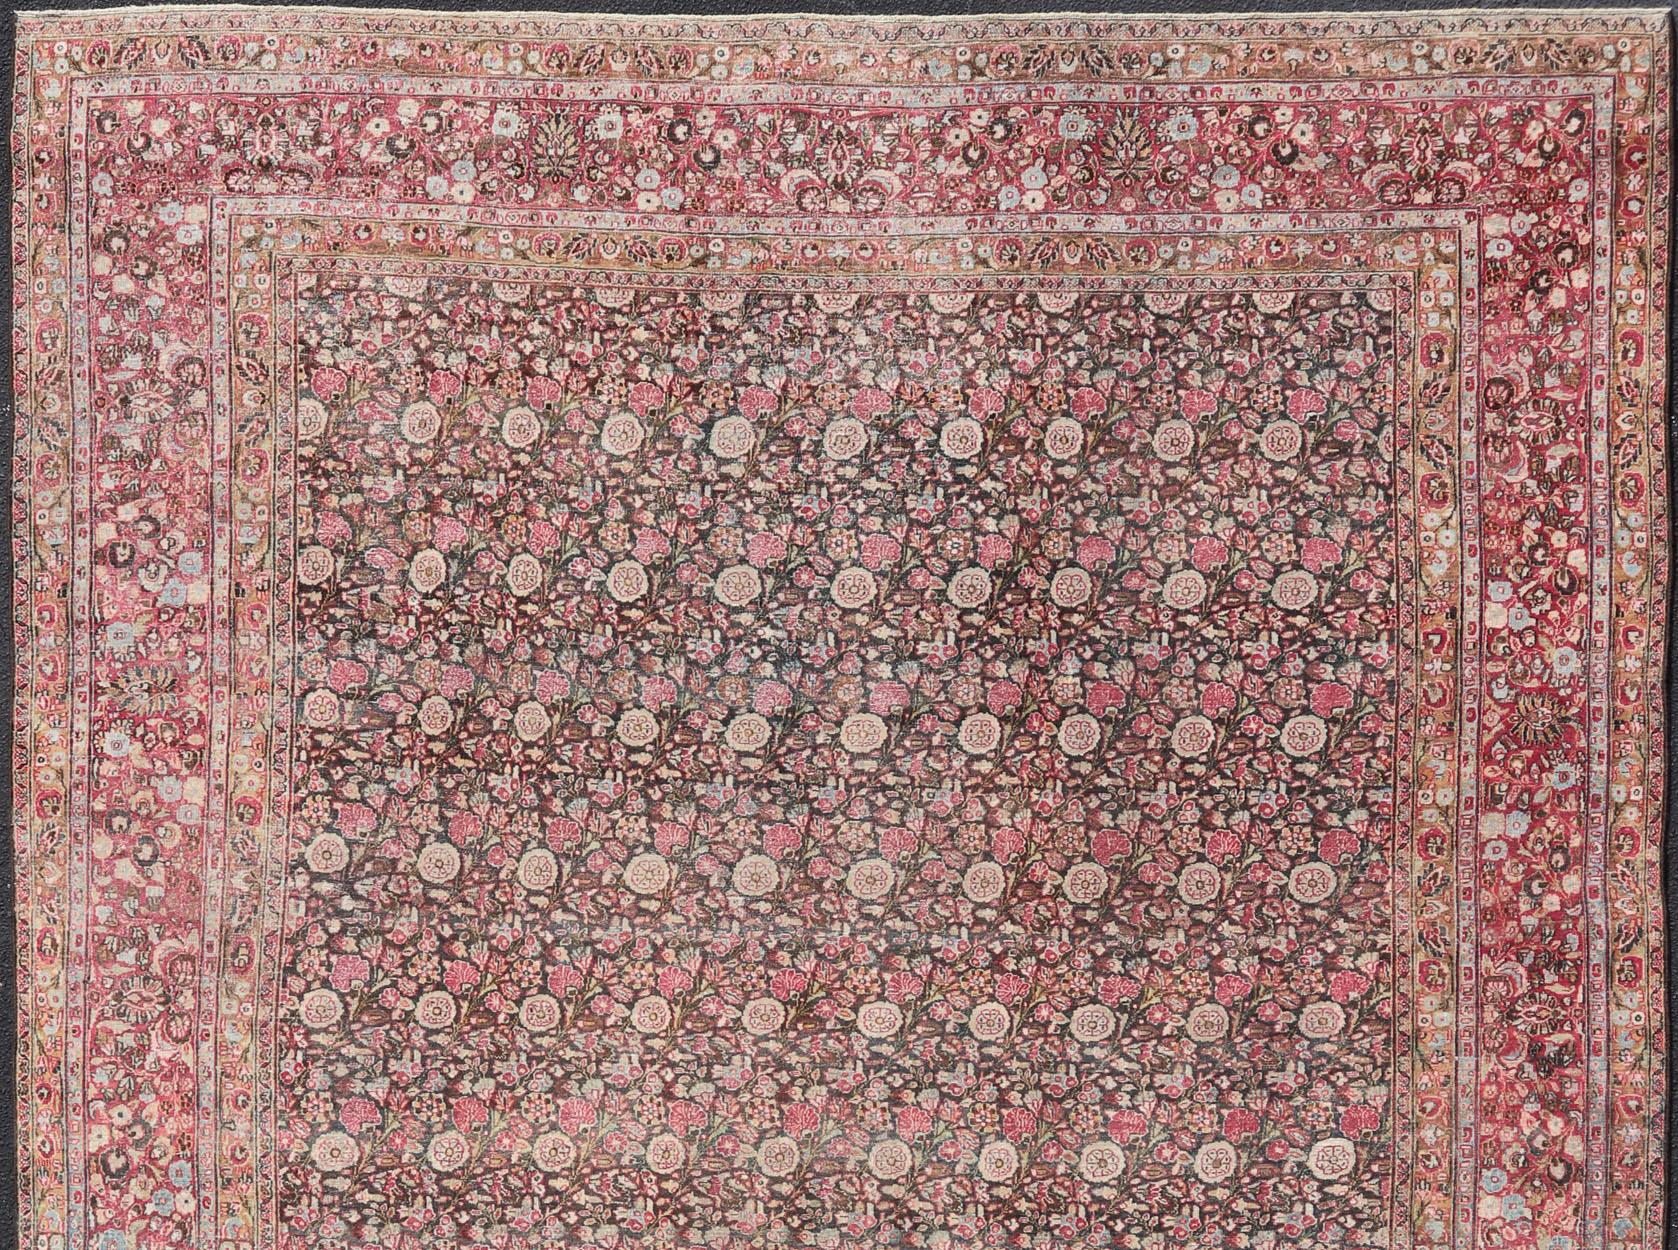 Large Antique Persian Khorasan rug with floral design in charcoal background and, red pink. Keivan Woven Arts / rug EMB-8502-178037, country of origin / type: Iran / Khorasan, circa 1920
Measures: 10'10 x 14'
This spectacular antique Persian